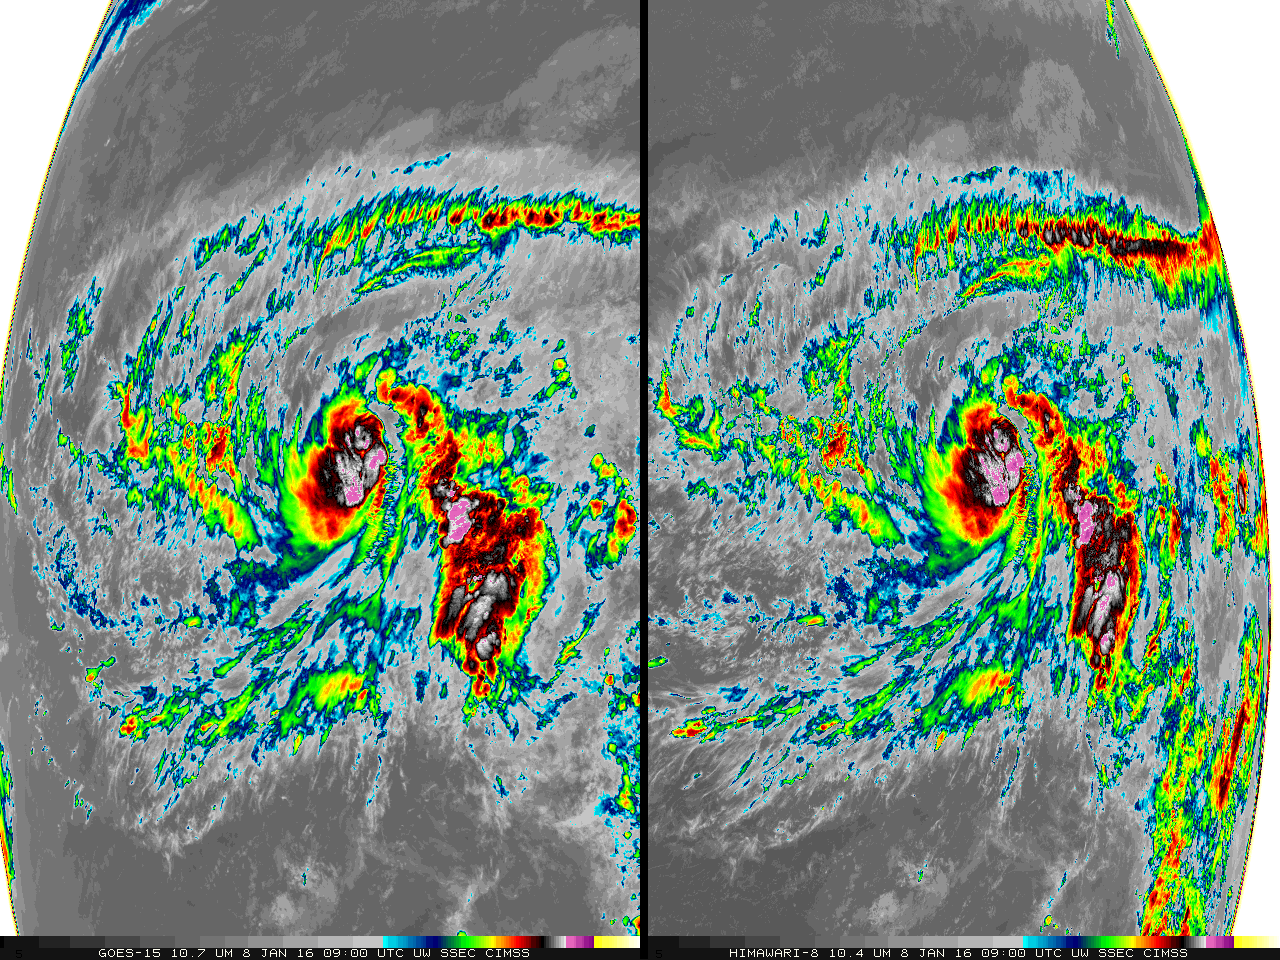 GOES-15 Infrared Imagery (10.7 µm) (left) and Himawari-8 Infrared (right) (10.35) at full GOES Resolution 0600 UTC 8 January 2016 - 1800 UTC 8 January 2016 [click to animate]